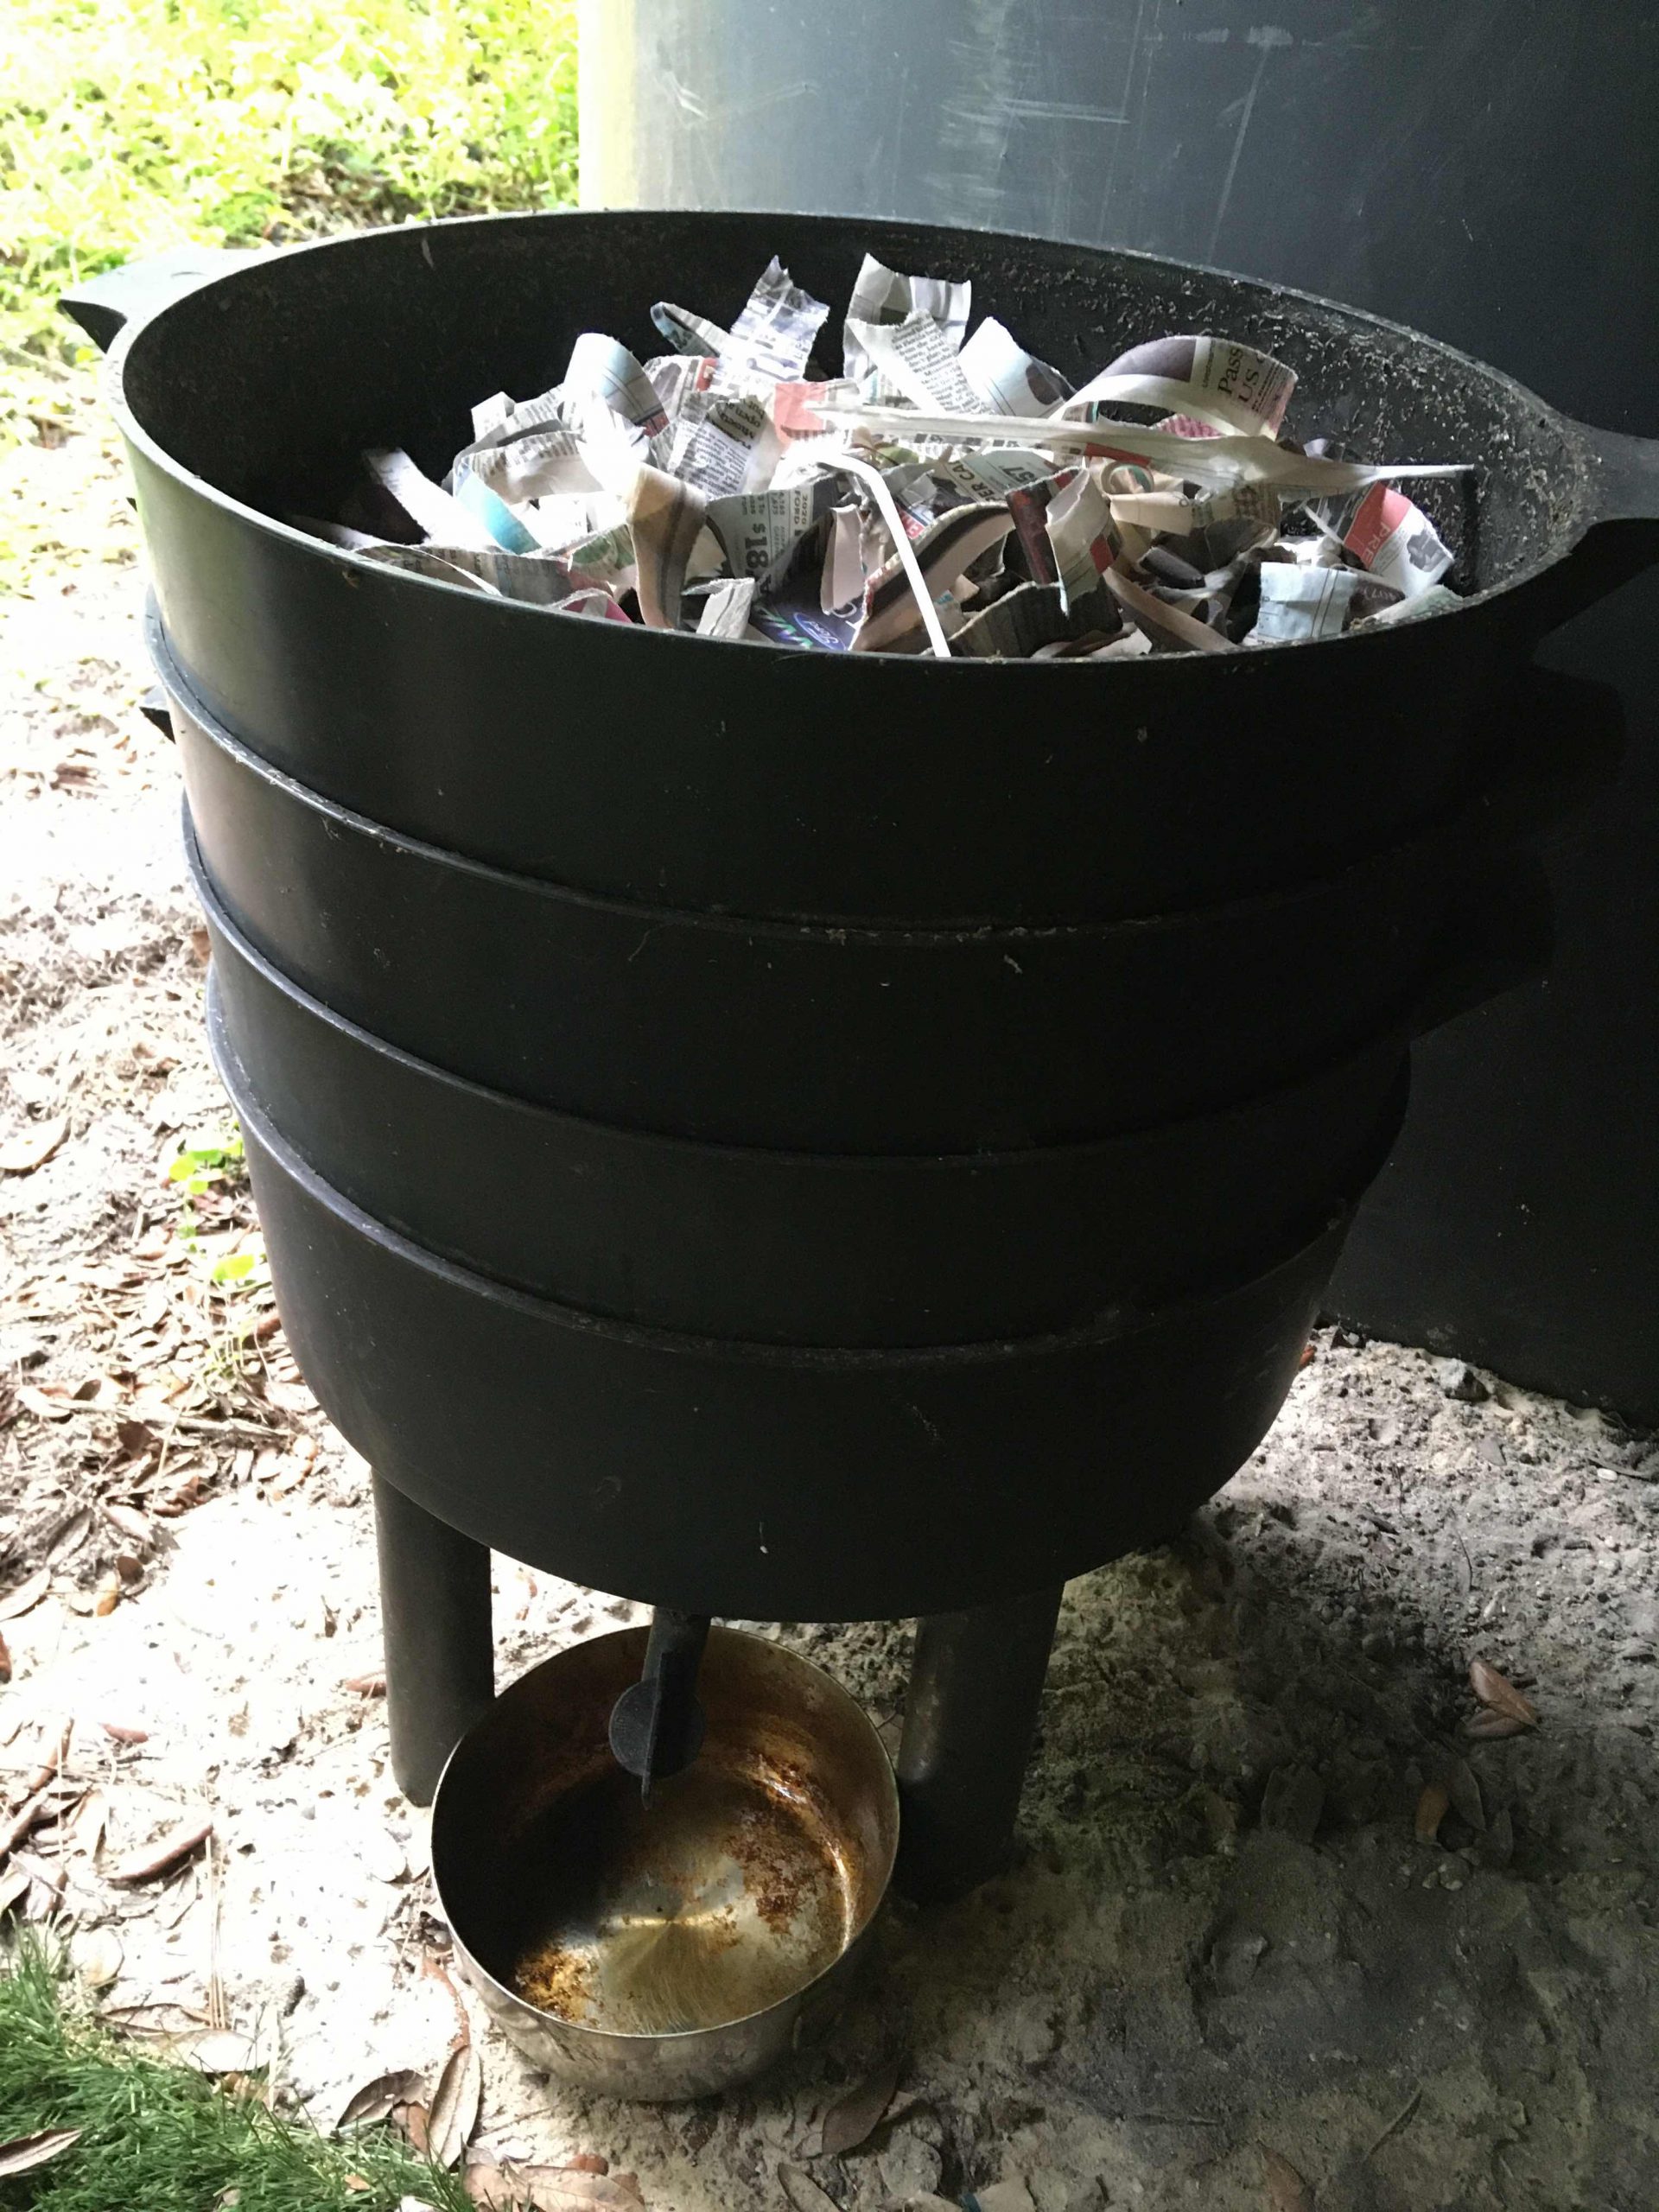 Vermicomposting (Using Worms for Composting) - UF/IFAS Extension